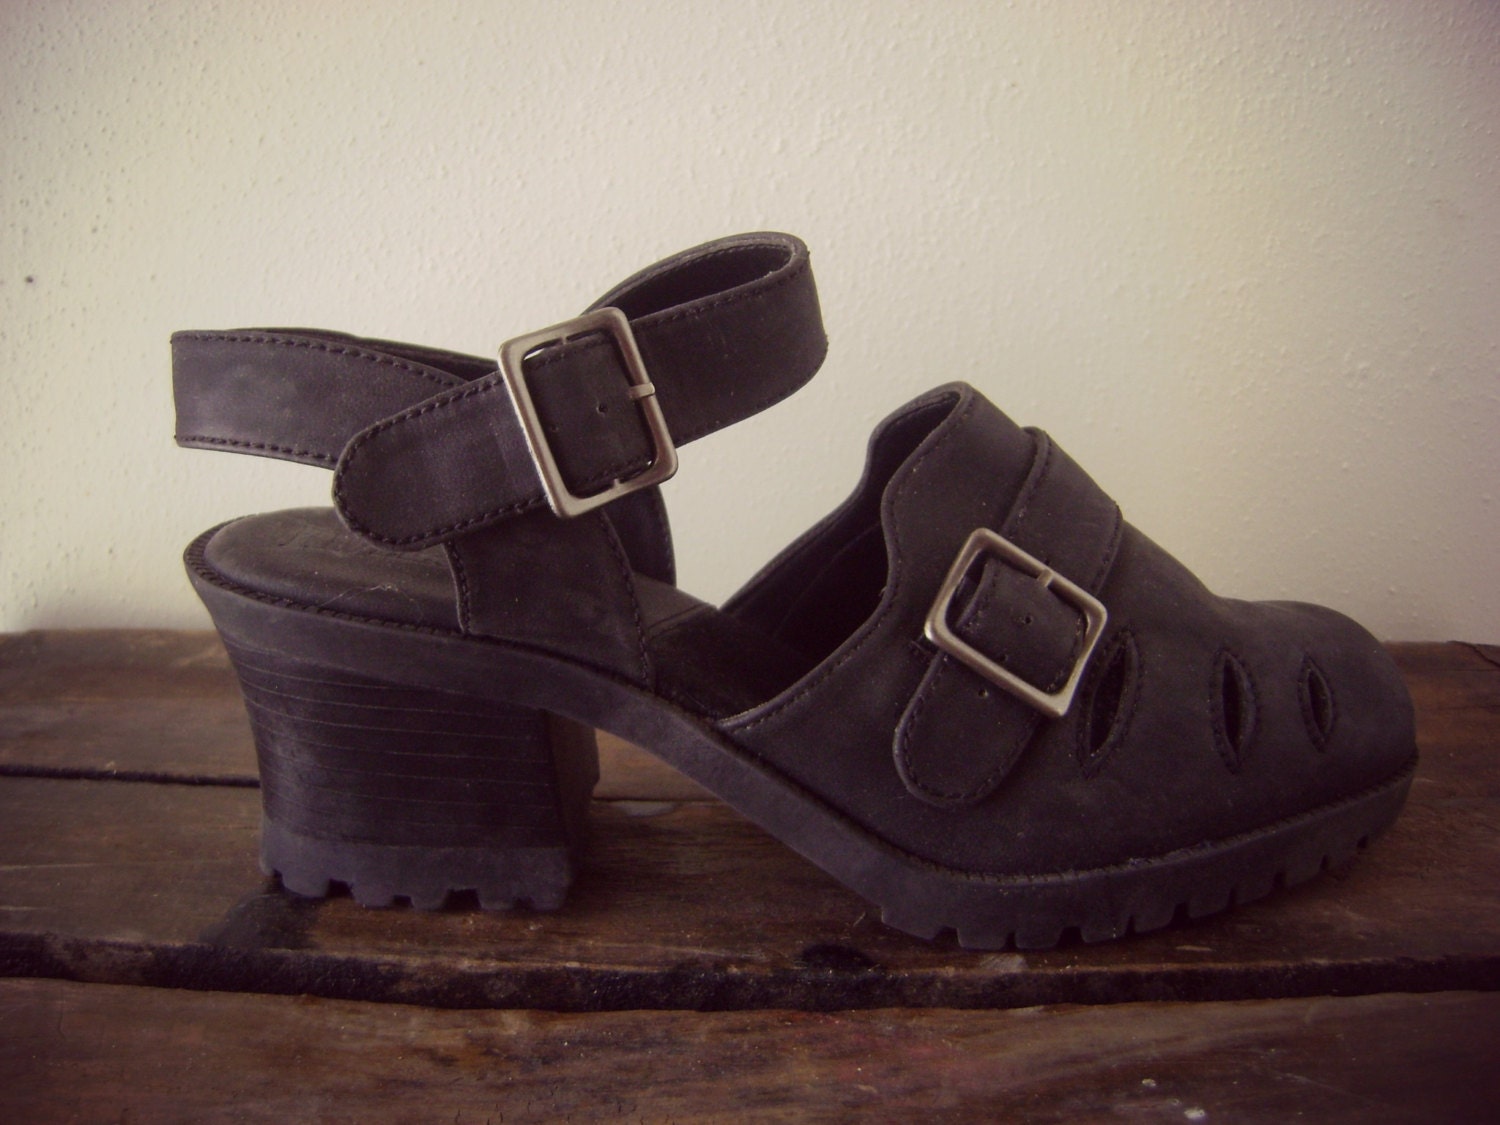 90s black chunky heel grunge sandals strappy clog style shoes